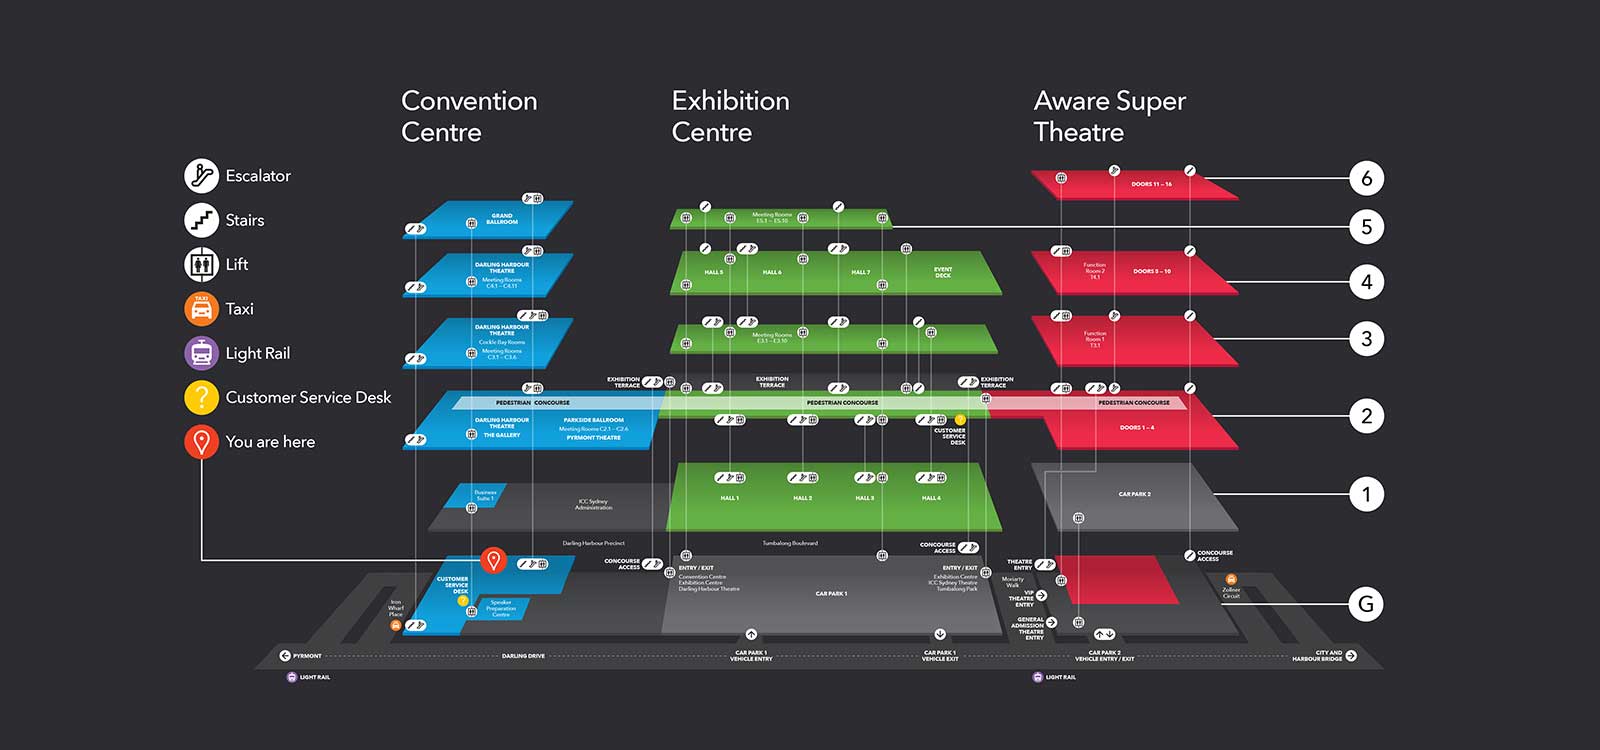 Entrance and Venue Levels Map